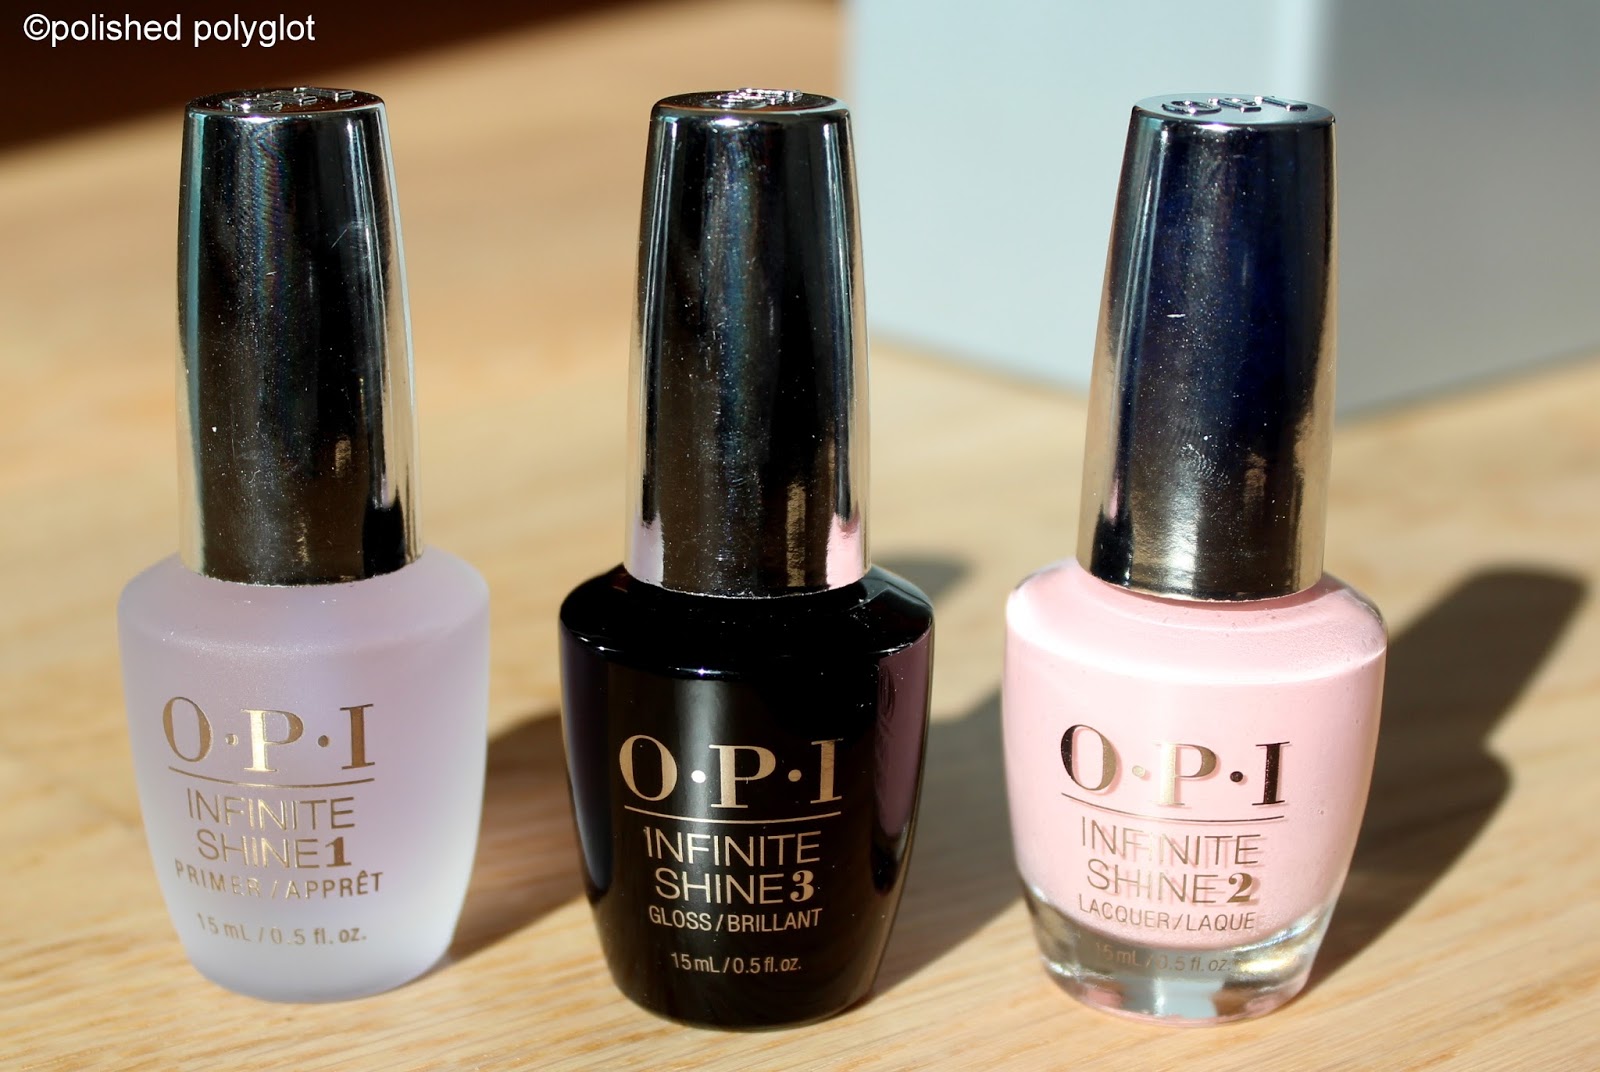 1. OPI Infinite Shine Nail Polish in "Mixed Colors" - wide 6